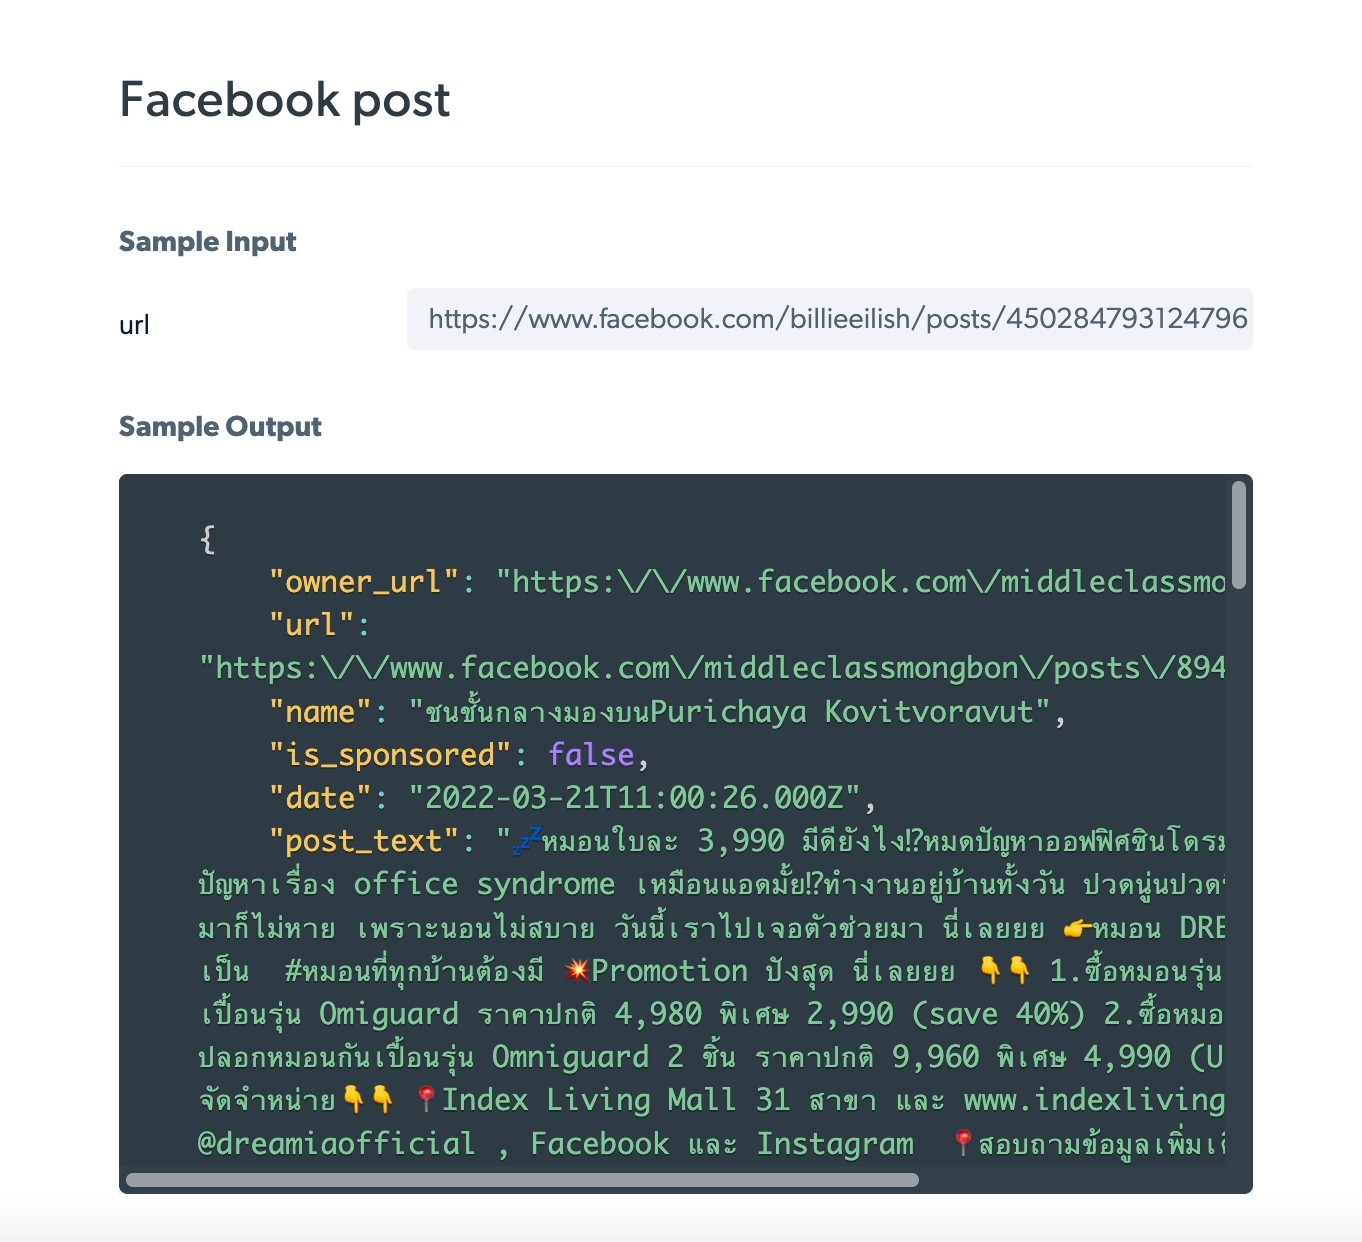 Bright Data's Facebook Scraper enable users to collect Facebook post data. 